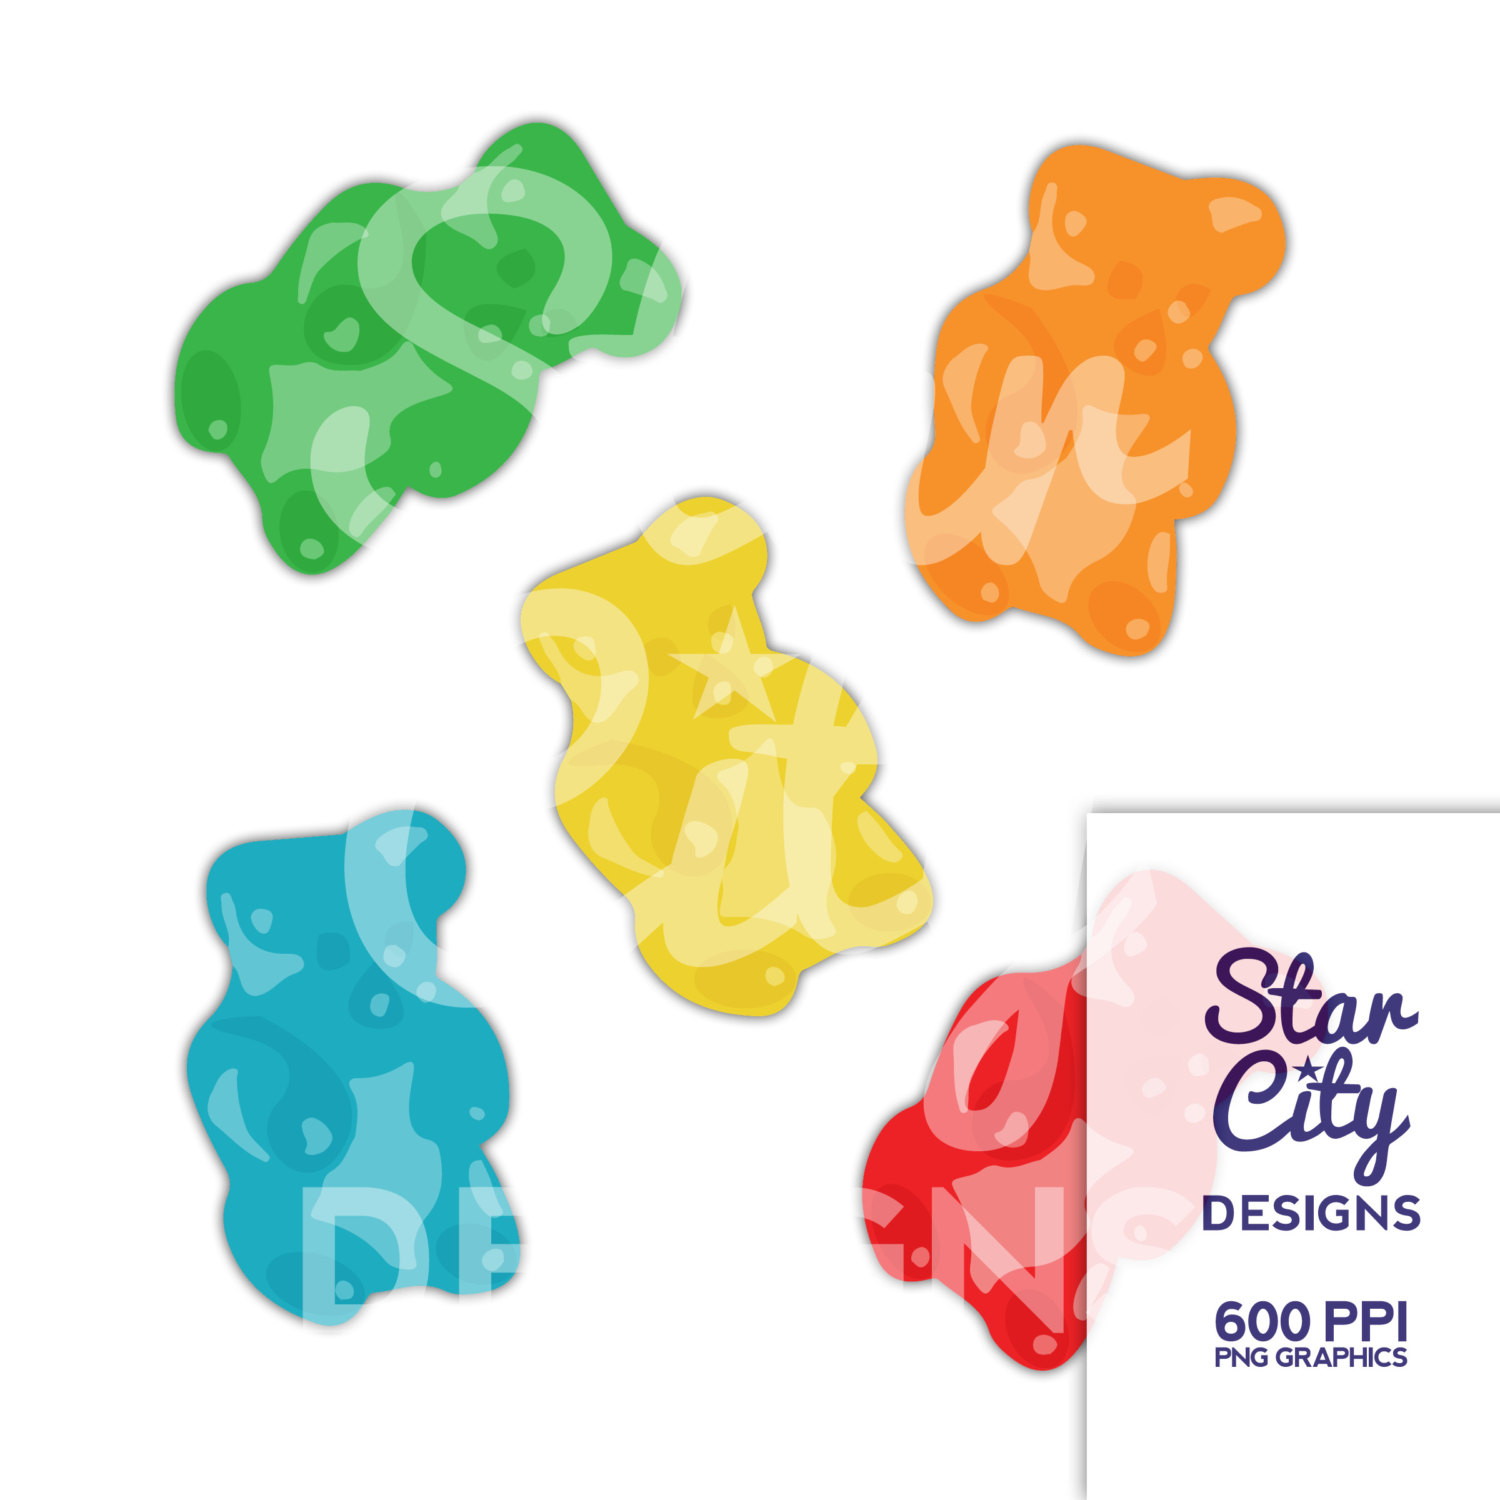 Gummy Bear clipart, gummy clipart, candy clipart, gummy clip art, clipart, vector art, vector graphics, instant download